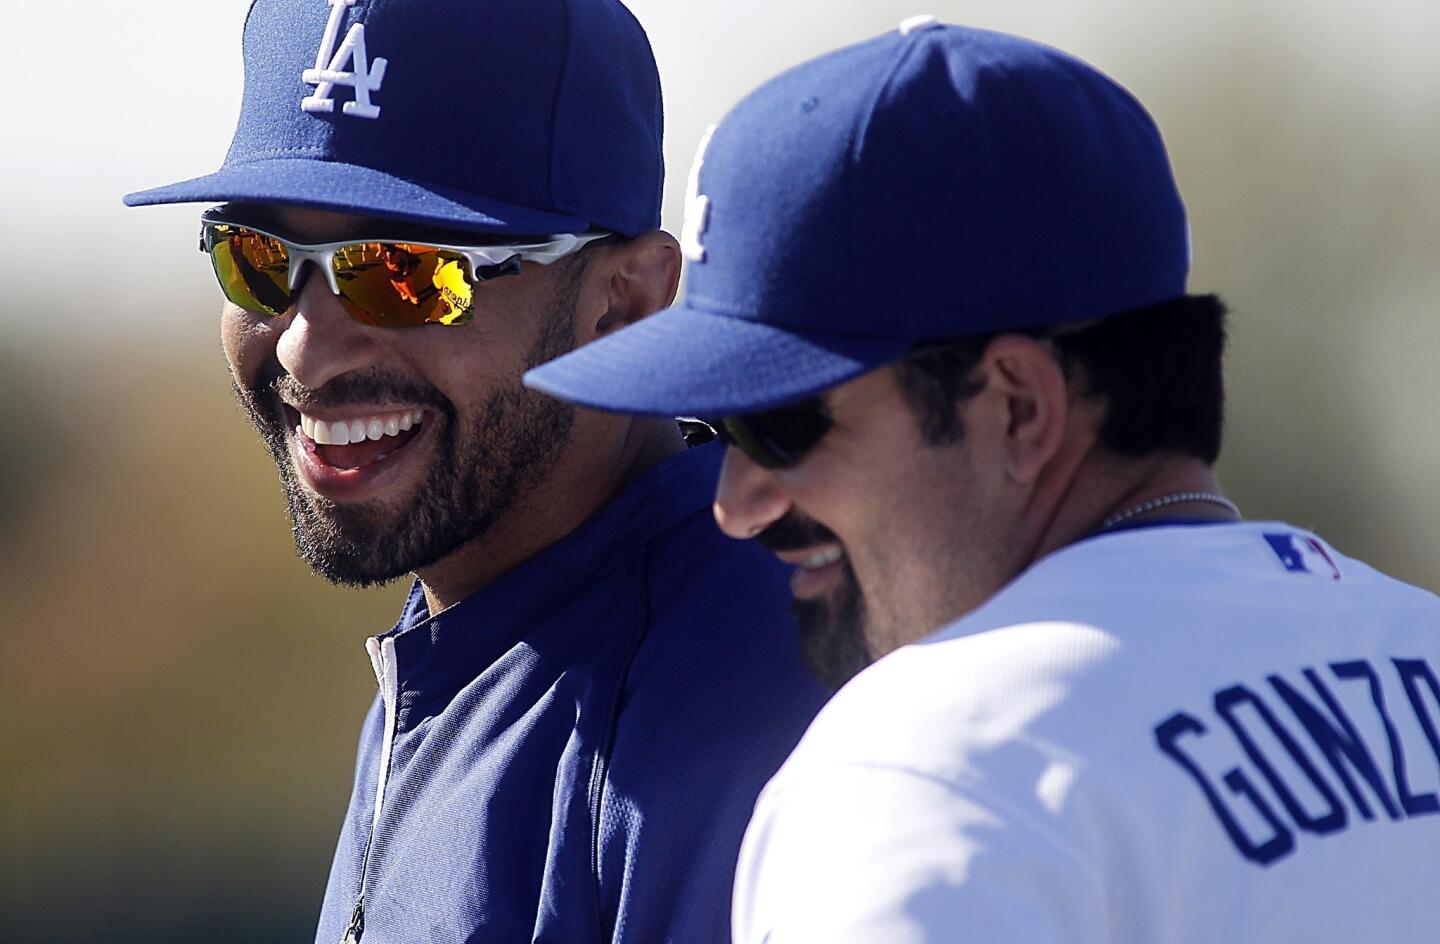 Dodgers center fielder Matt Kemp and first baseman Adrian Gonzalez form one of the most potent one-two punches in the middle of the batting order for any team in the majors. They'll each be paid more than $20 million this season.